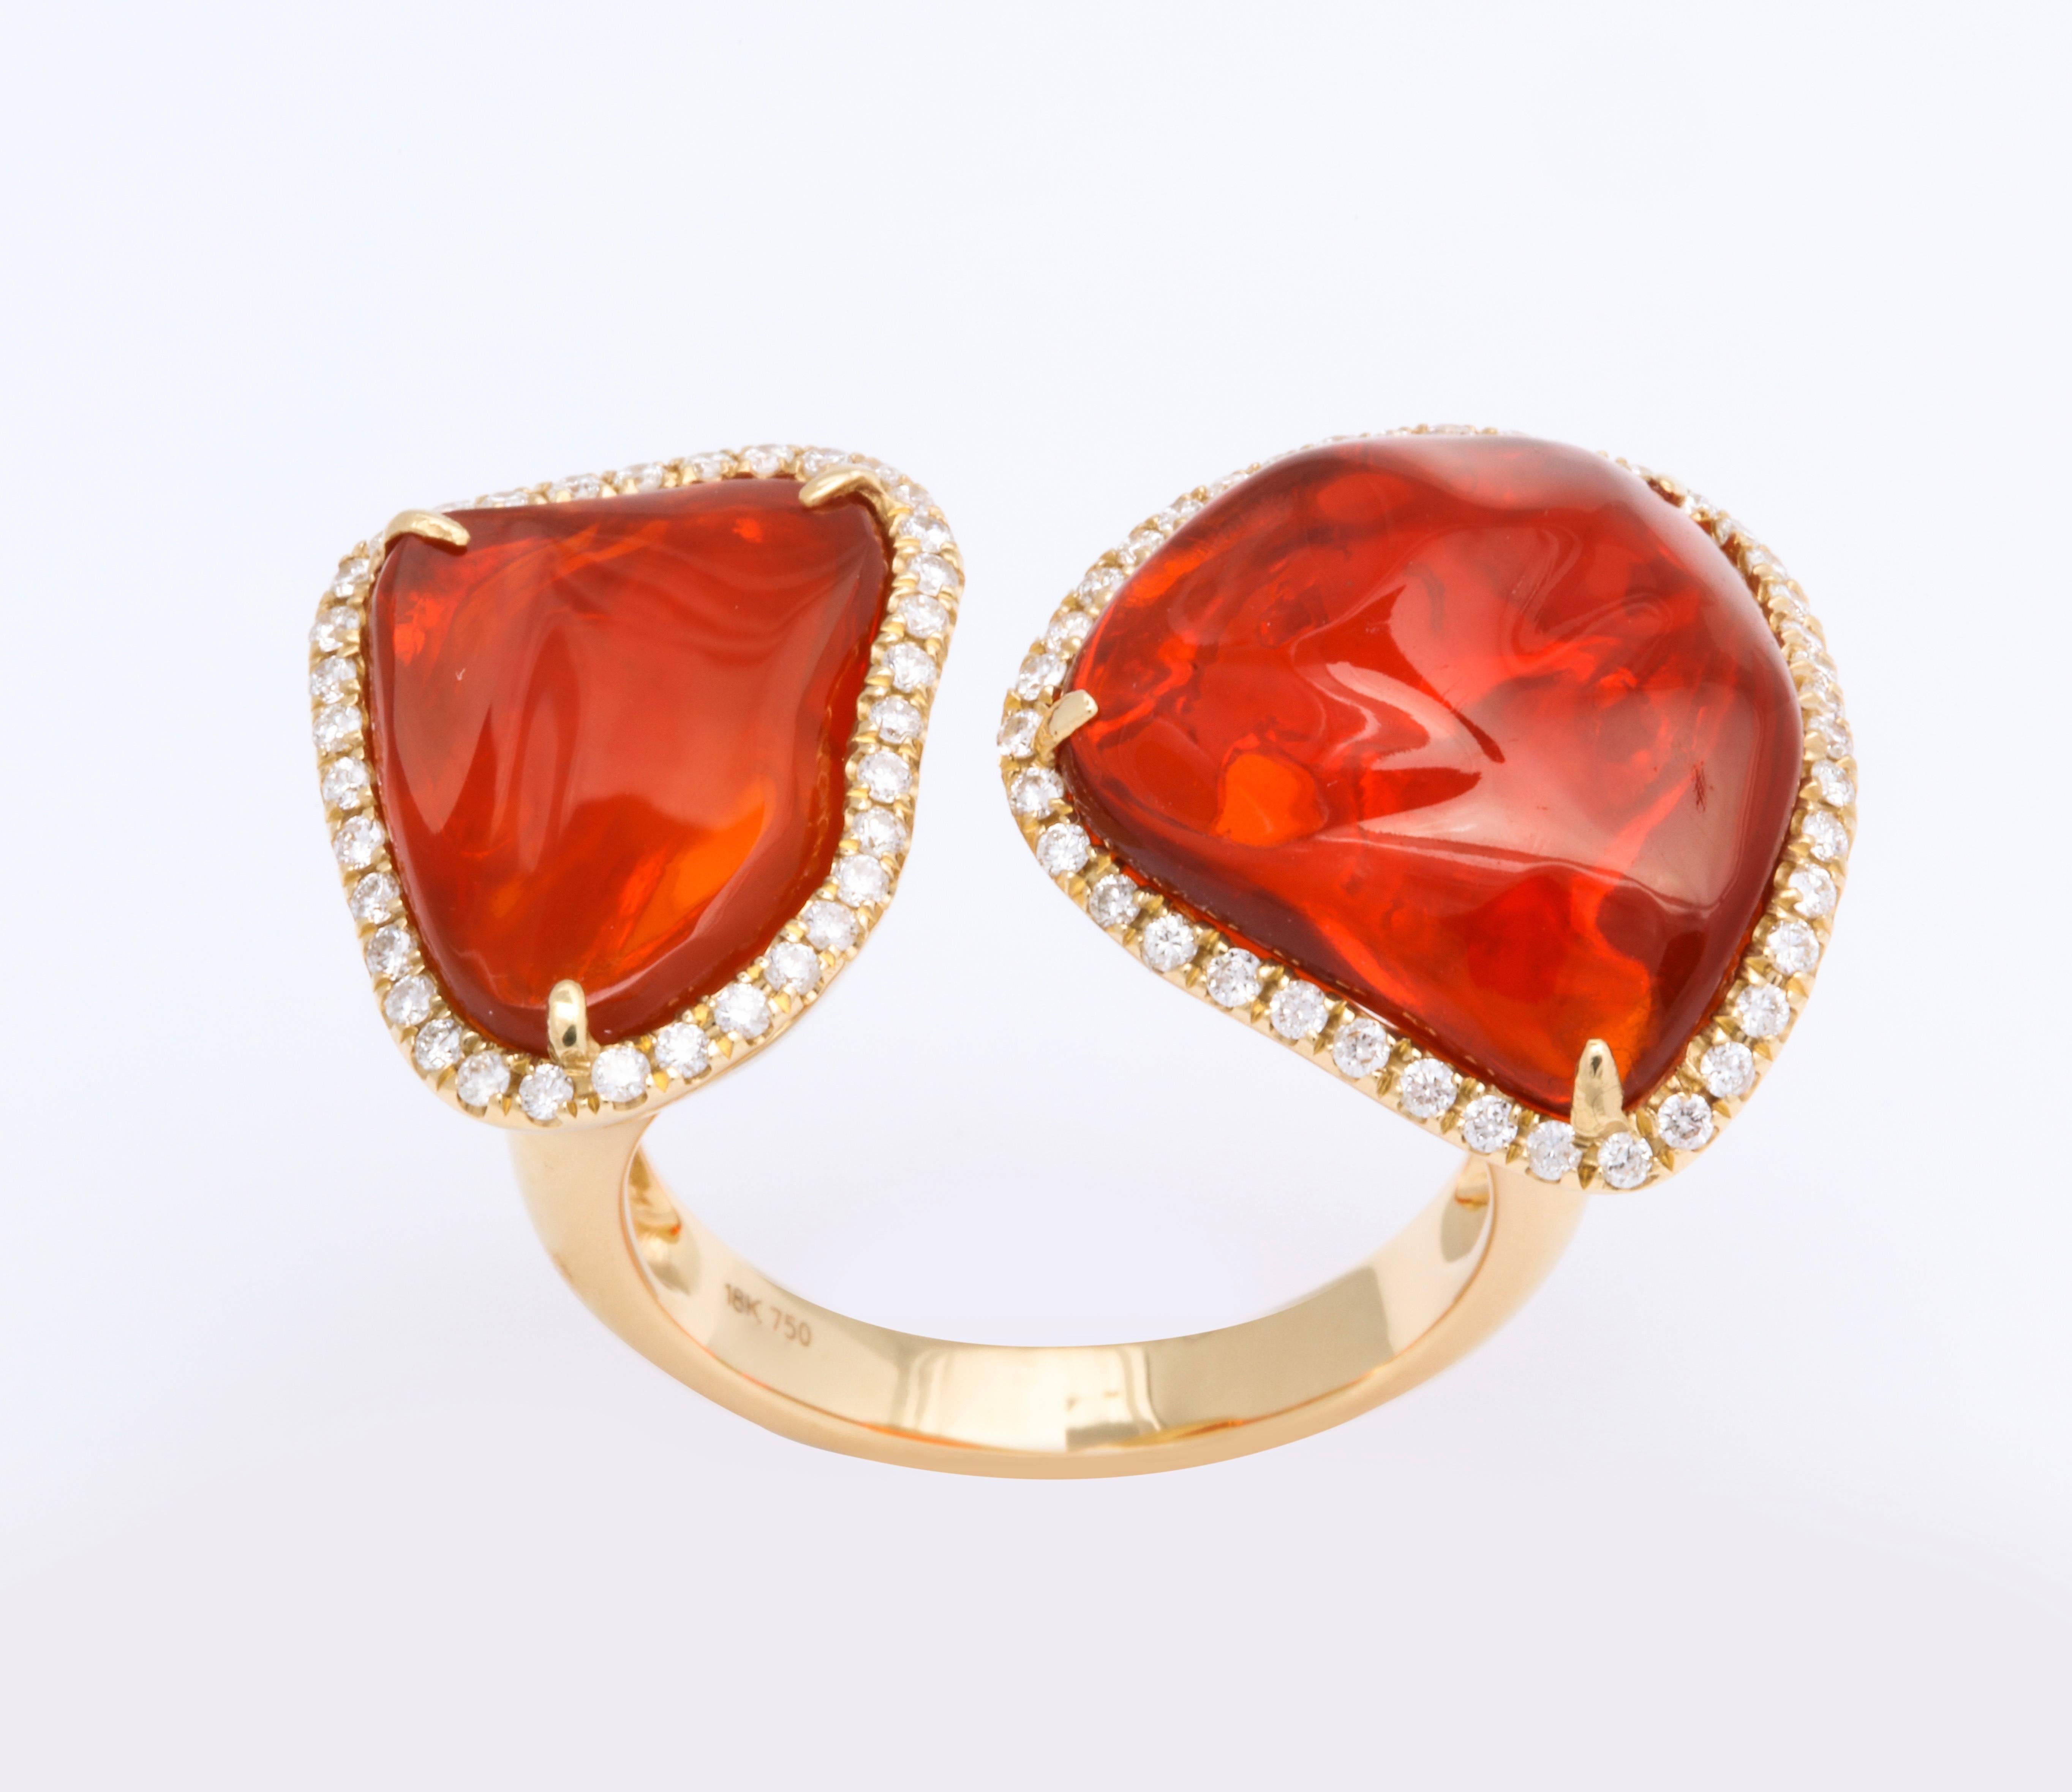 The twin ring is comprised of two baroque, free-form cut Mexican fire opals (2=8.10cts) encircled with diamonds (0.45cts) and set in 18kt yellow gold.  A one of a kind, bright vivid orange show stopper.  Size 6 1/2

Fire opals symbolize joy of the